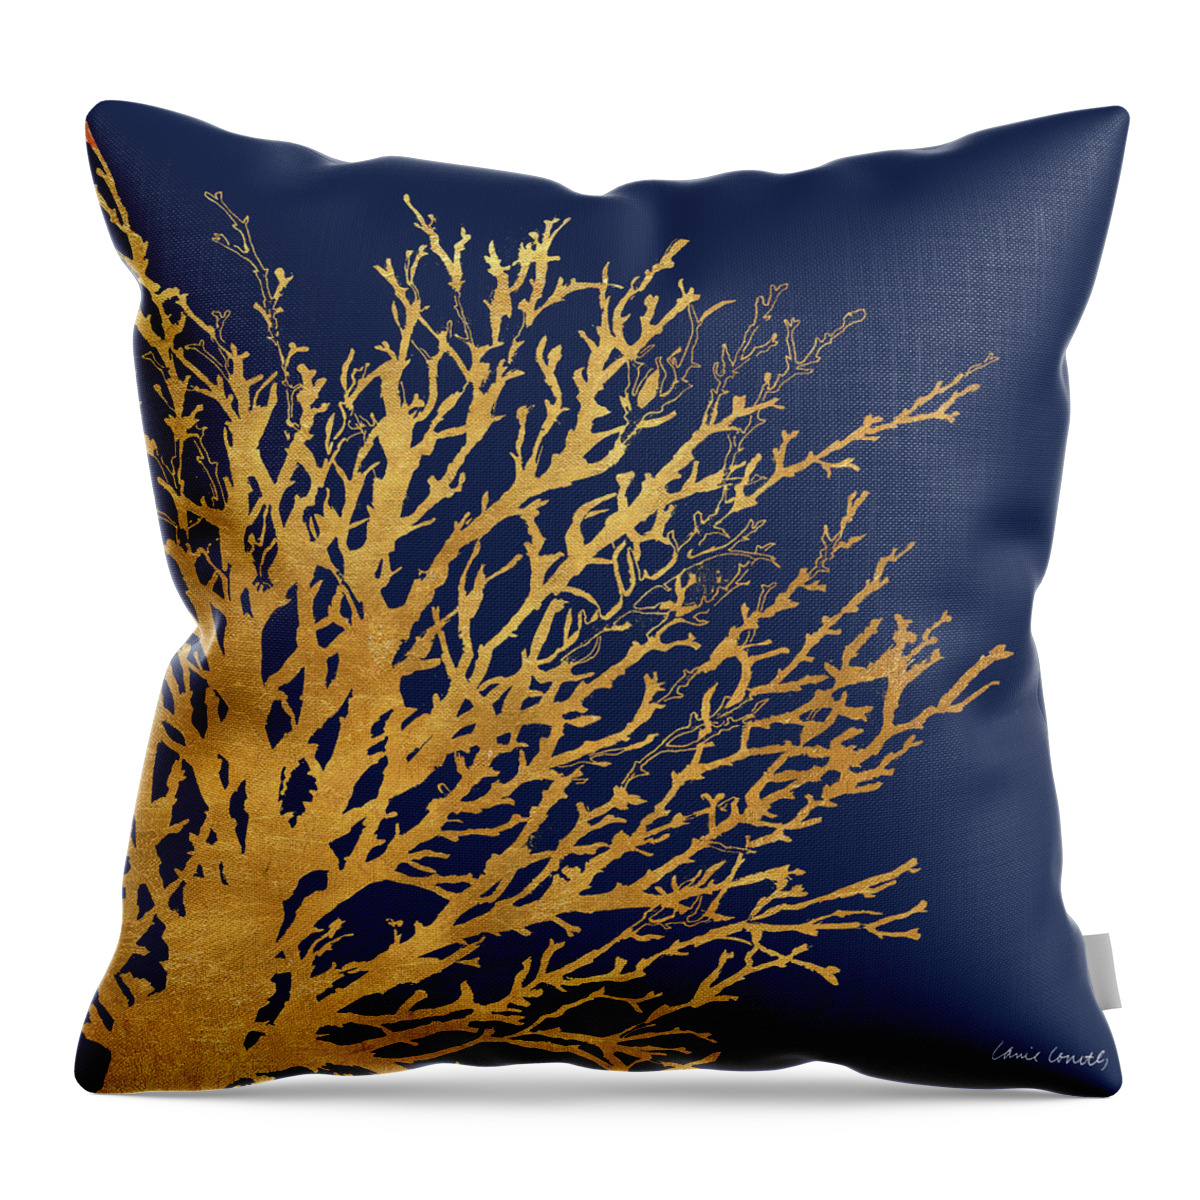 Gold Throw Pillow featuring the mixed media Gold Medley On Navy by Lanie Loreth